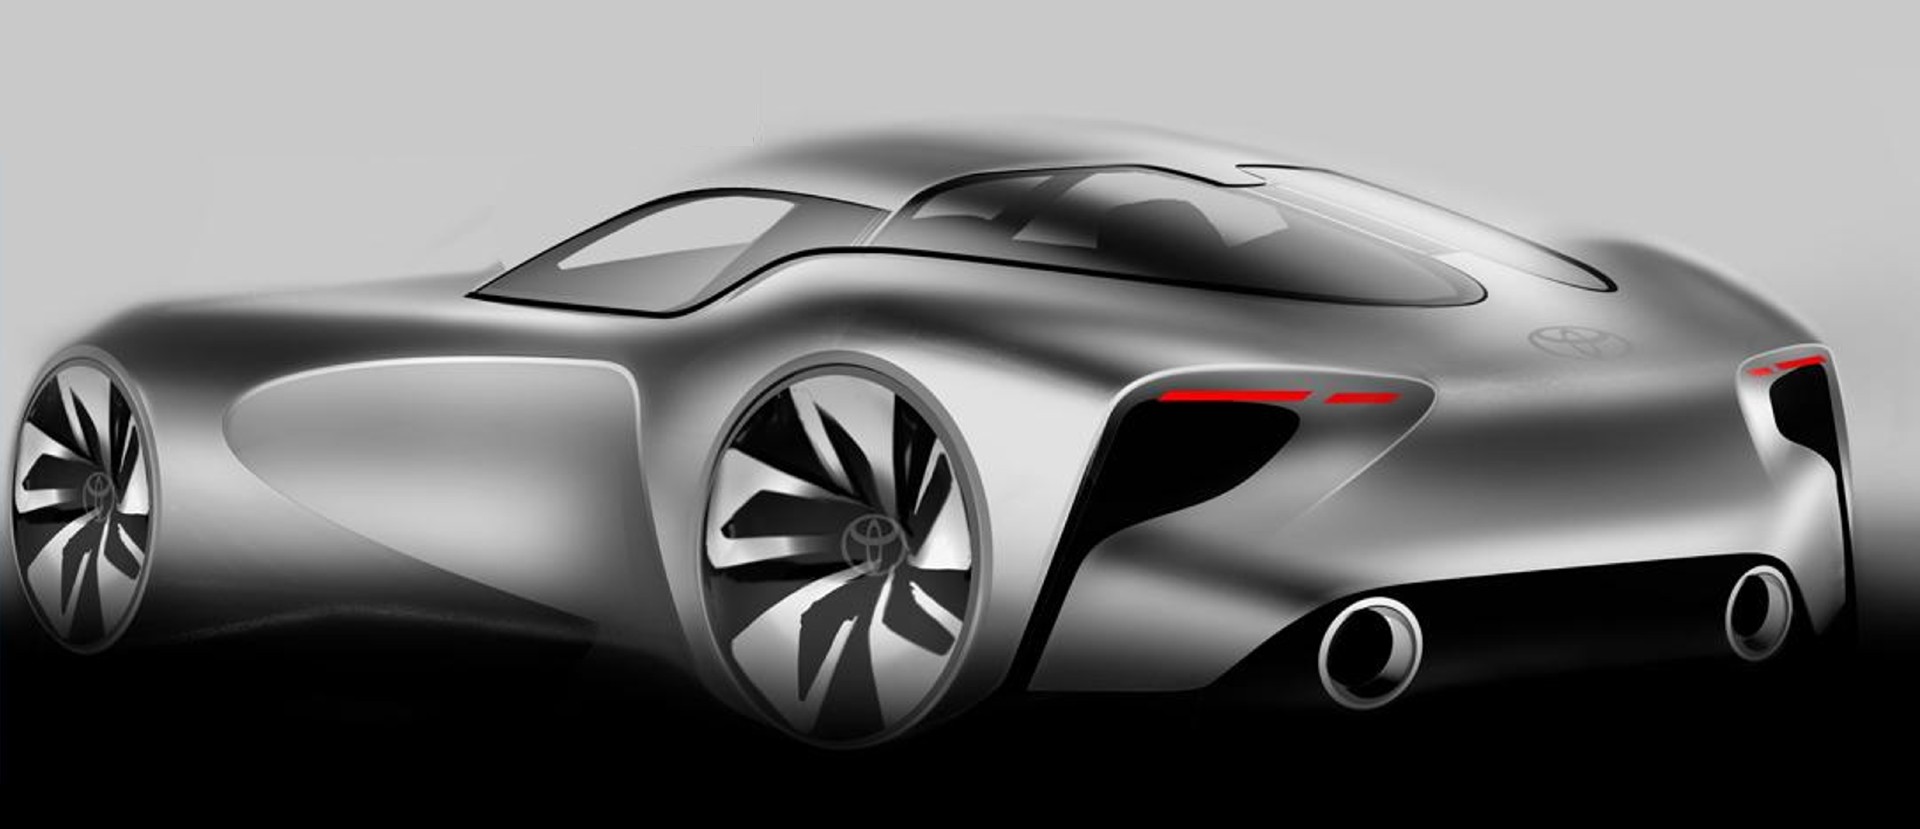 Toyota-GR-Supra-Early-Sketches-8.jpg